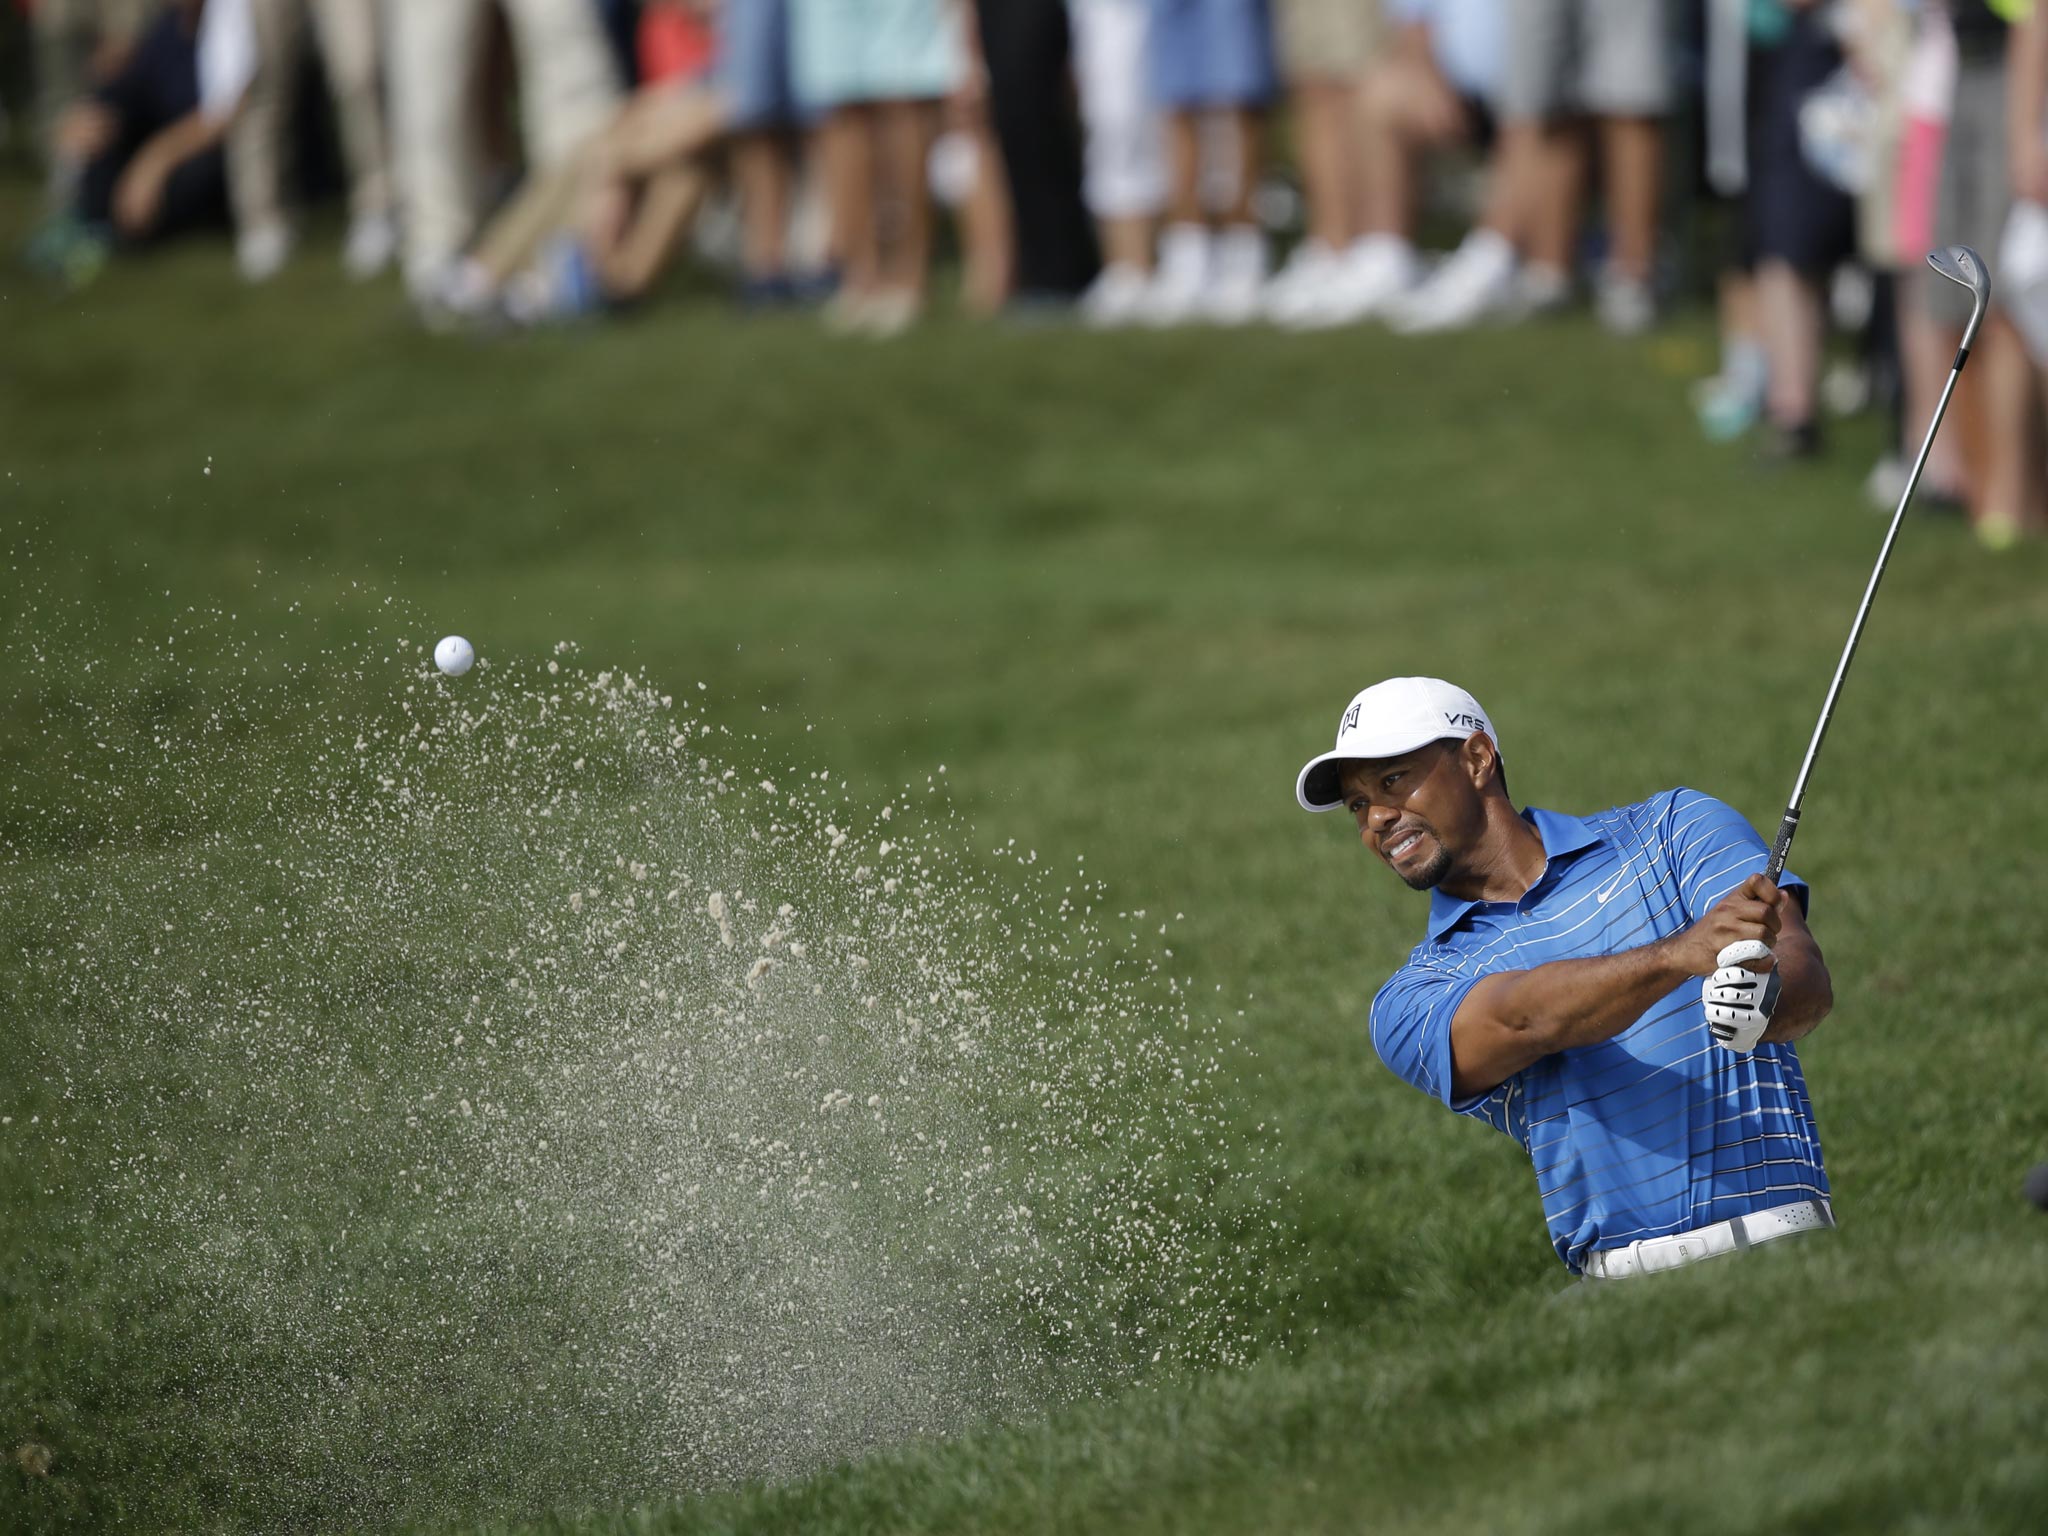 Tiger Woods chips out of a bunker on his way to a consolation birdie on the 18th hole yesterday